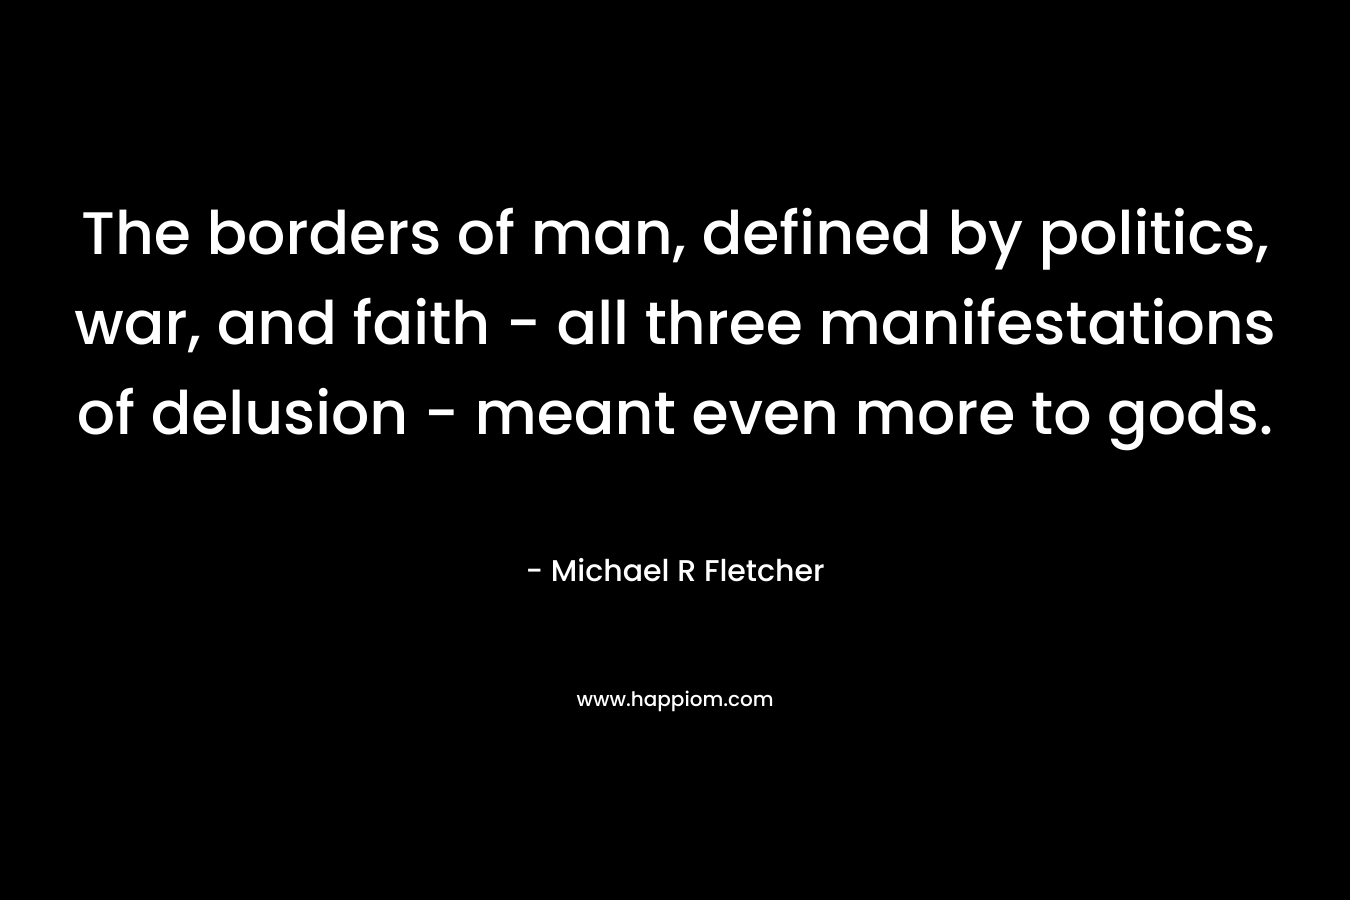 The borders of man, defined by politics, war, and faith - all three manifestations of delusion - meant even more to gods.